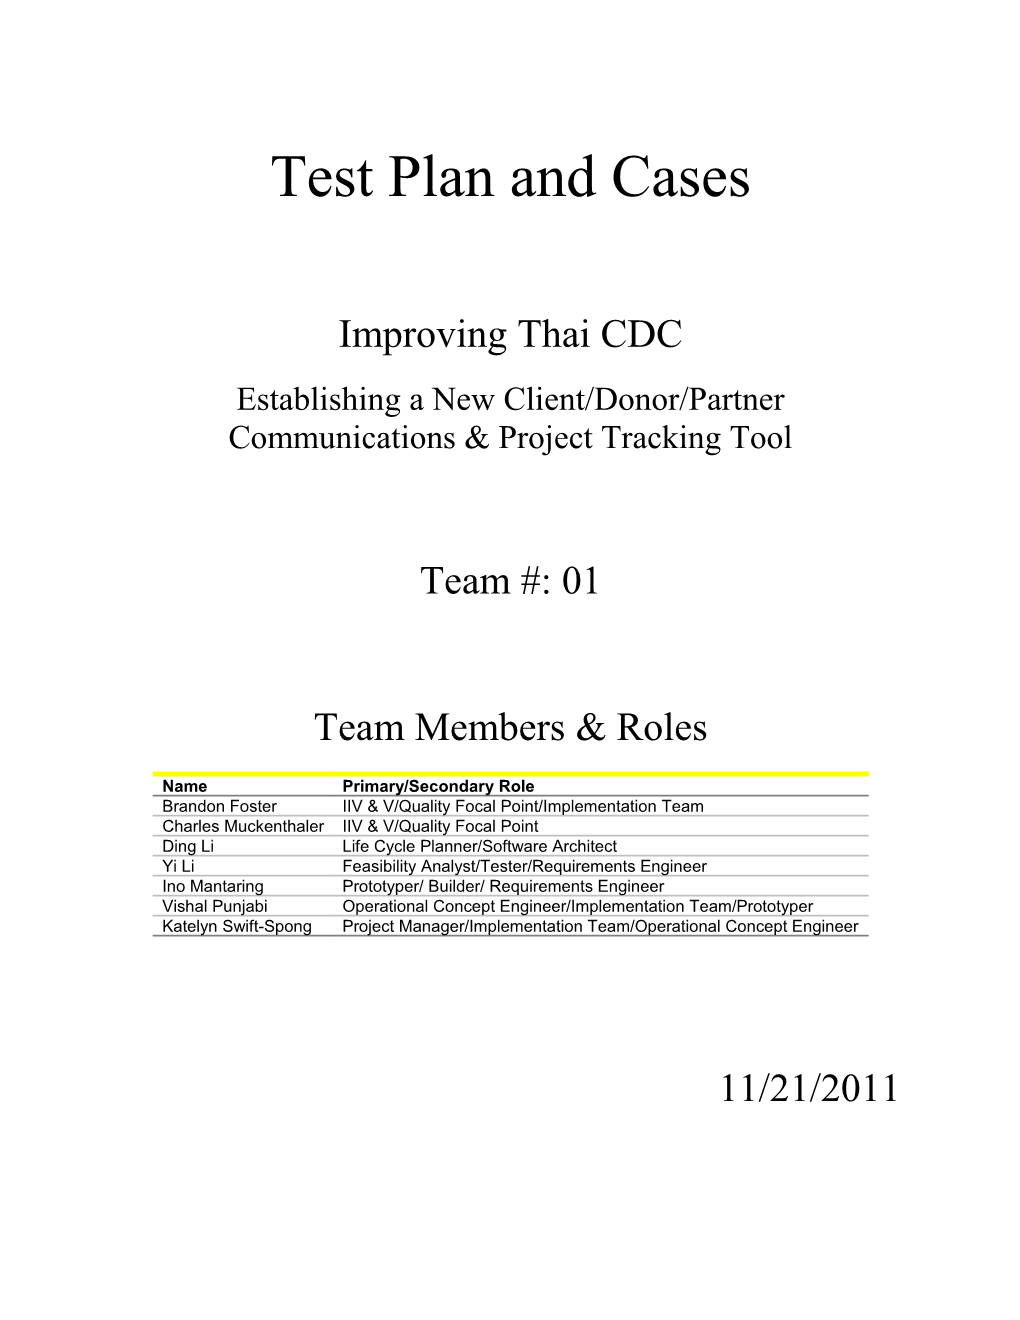 Test Plan and Cases (TPC) s4